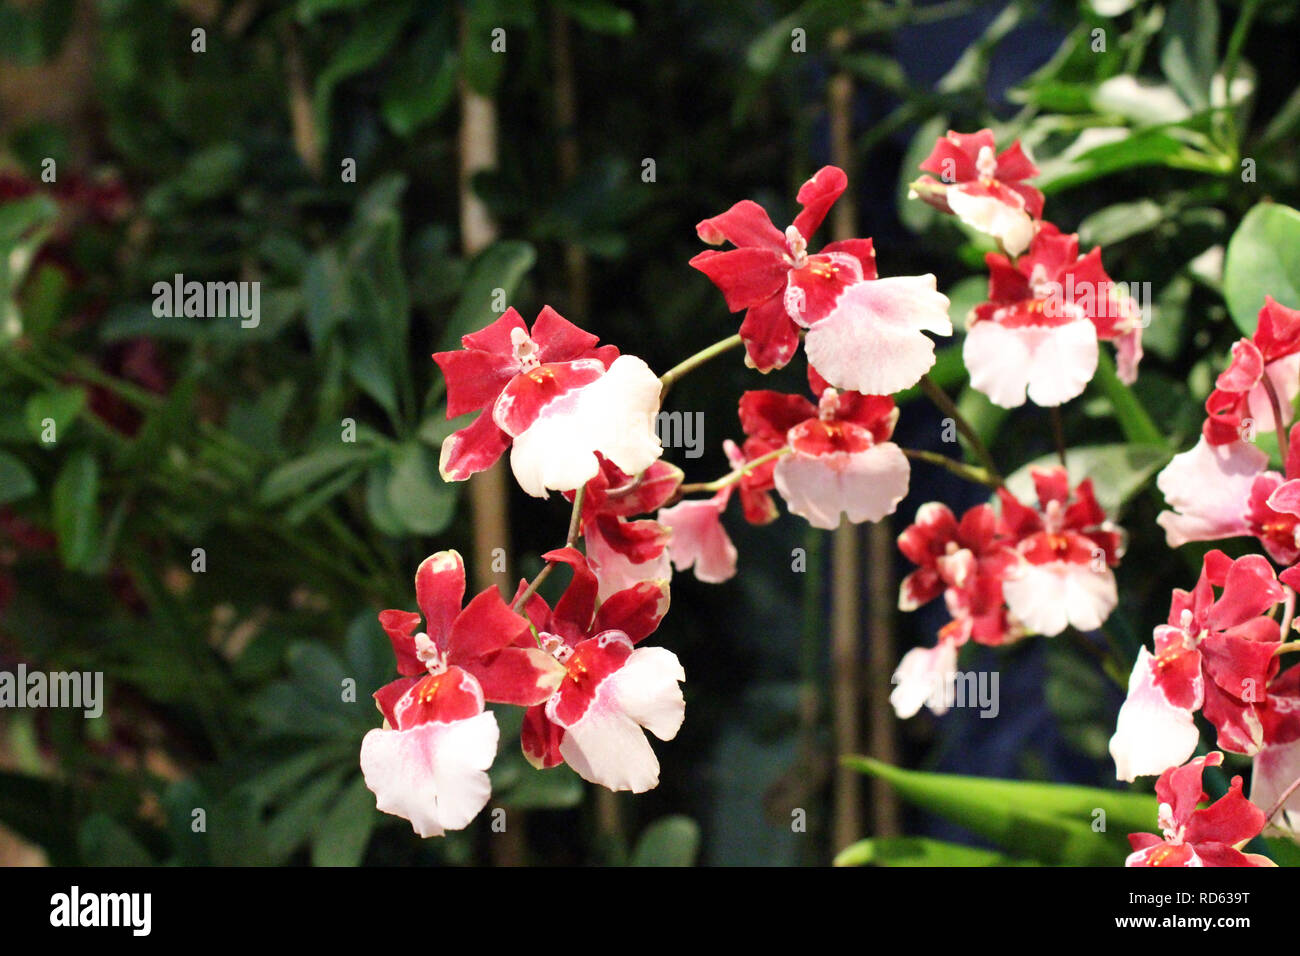 A flowering branch of red and white Oncidium orchids Stock Photo